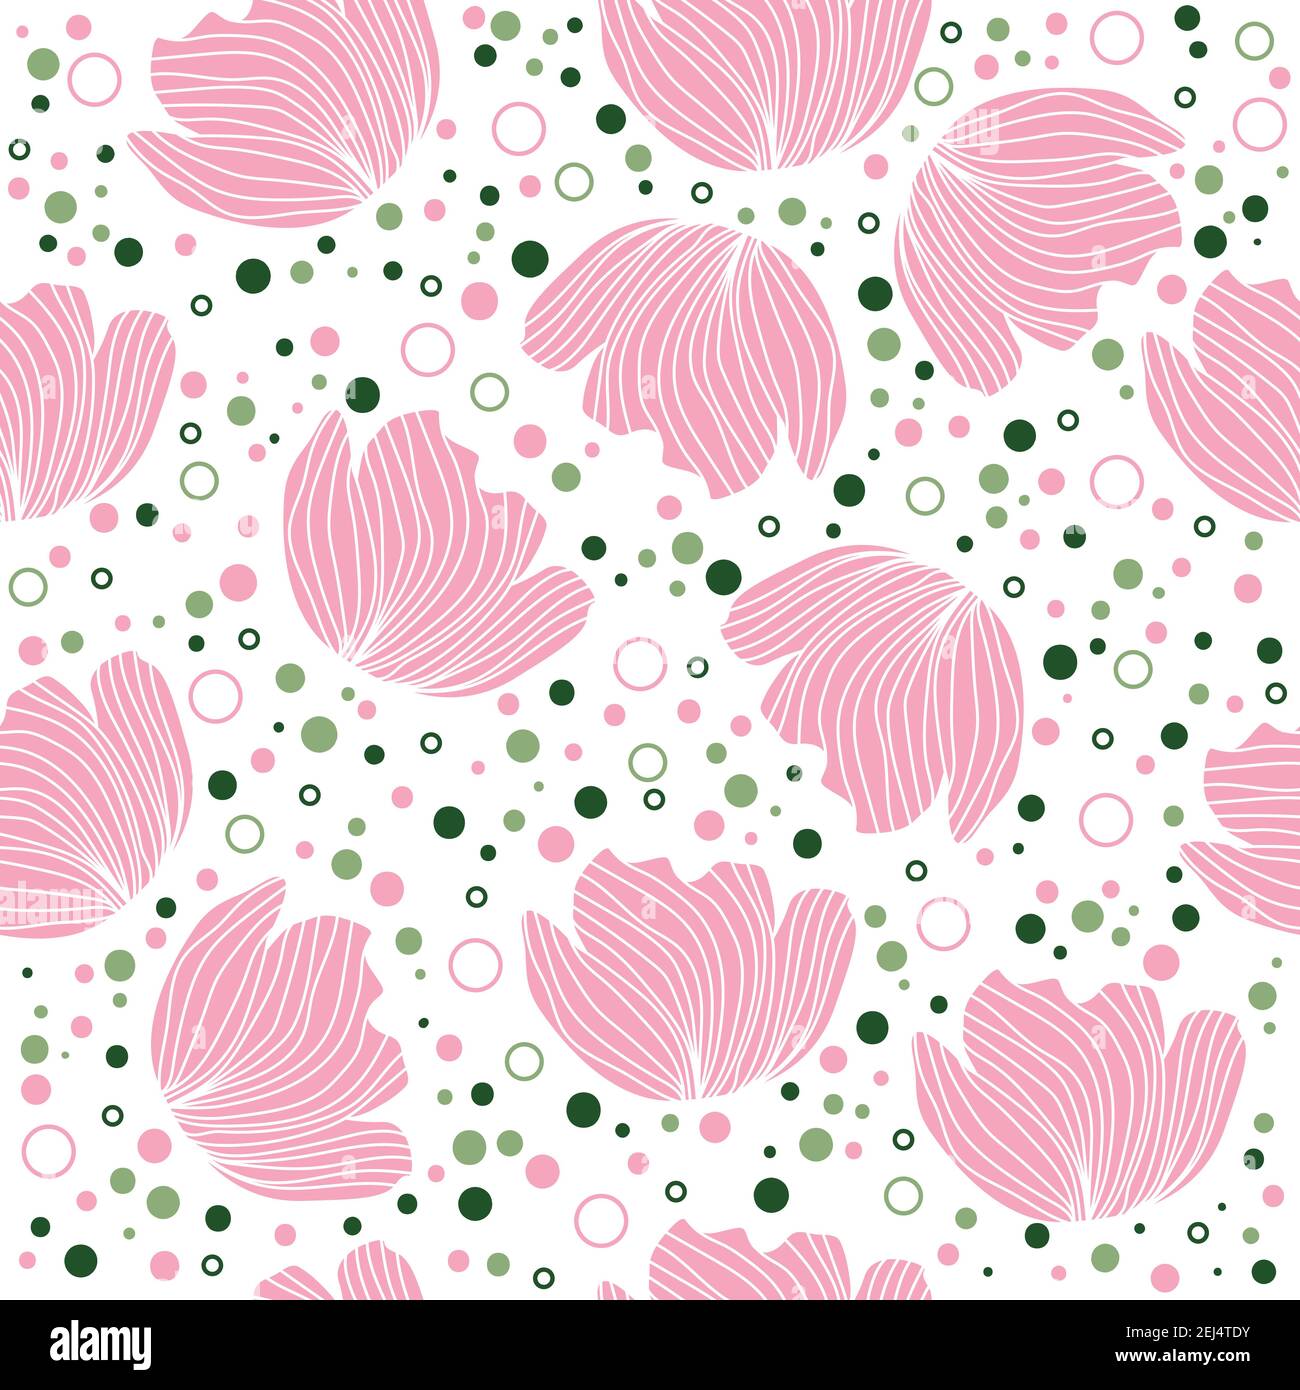 Floral pattern design with flower silhouettes, dots and small circles on a transparent background Stock Vector